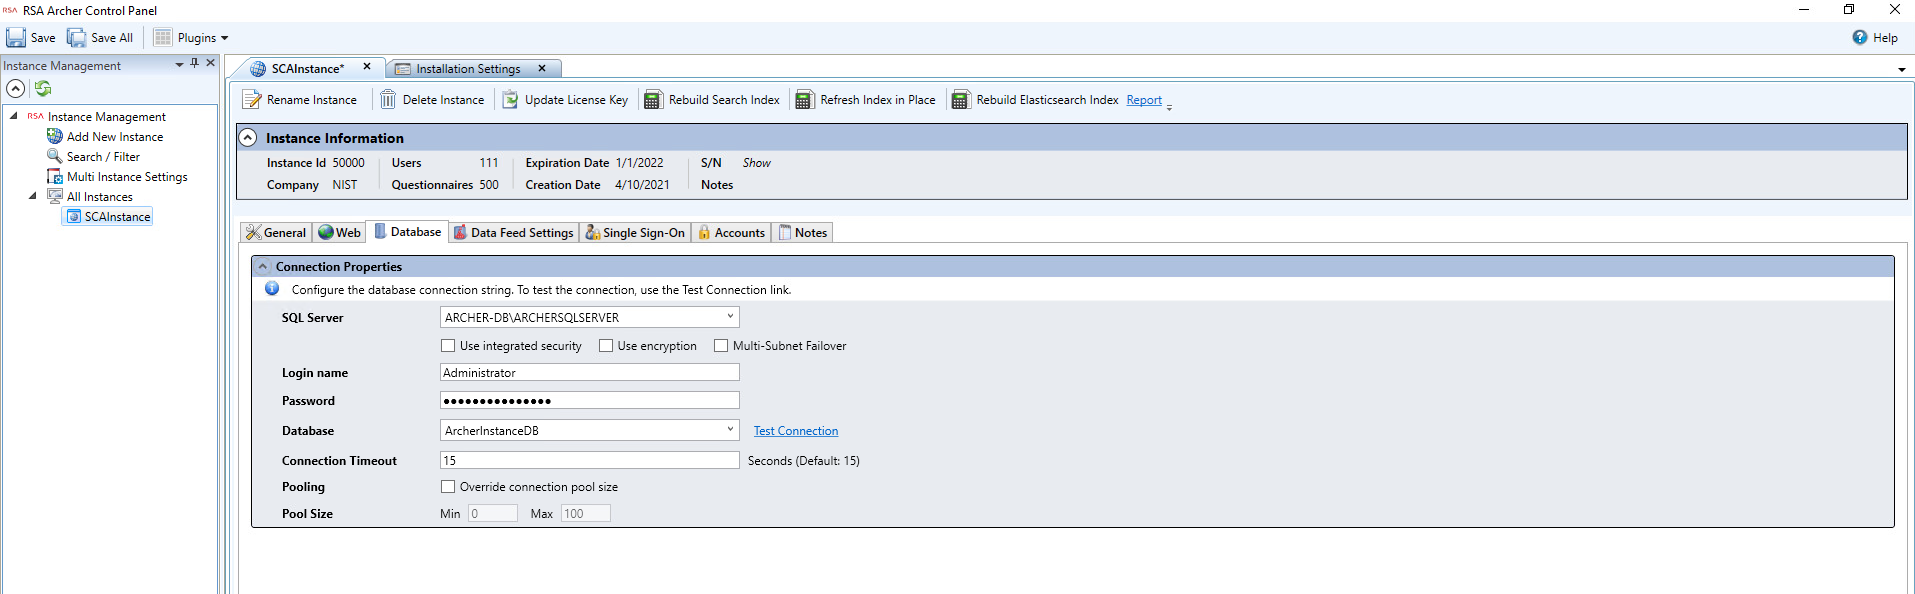 Screenshot of entering configuration settings for a new instance from the RSA Control Panel